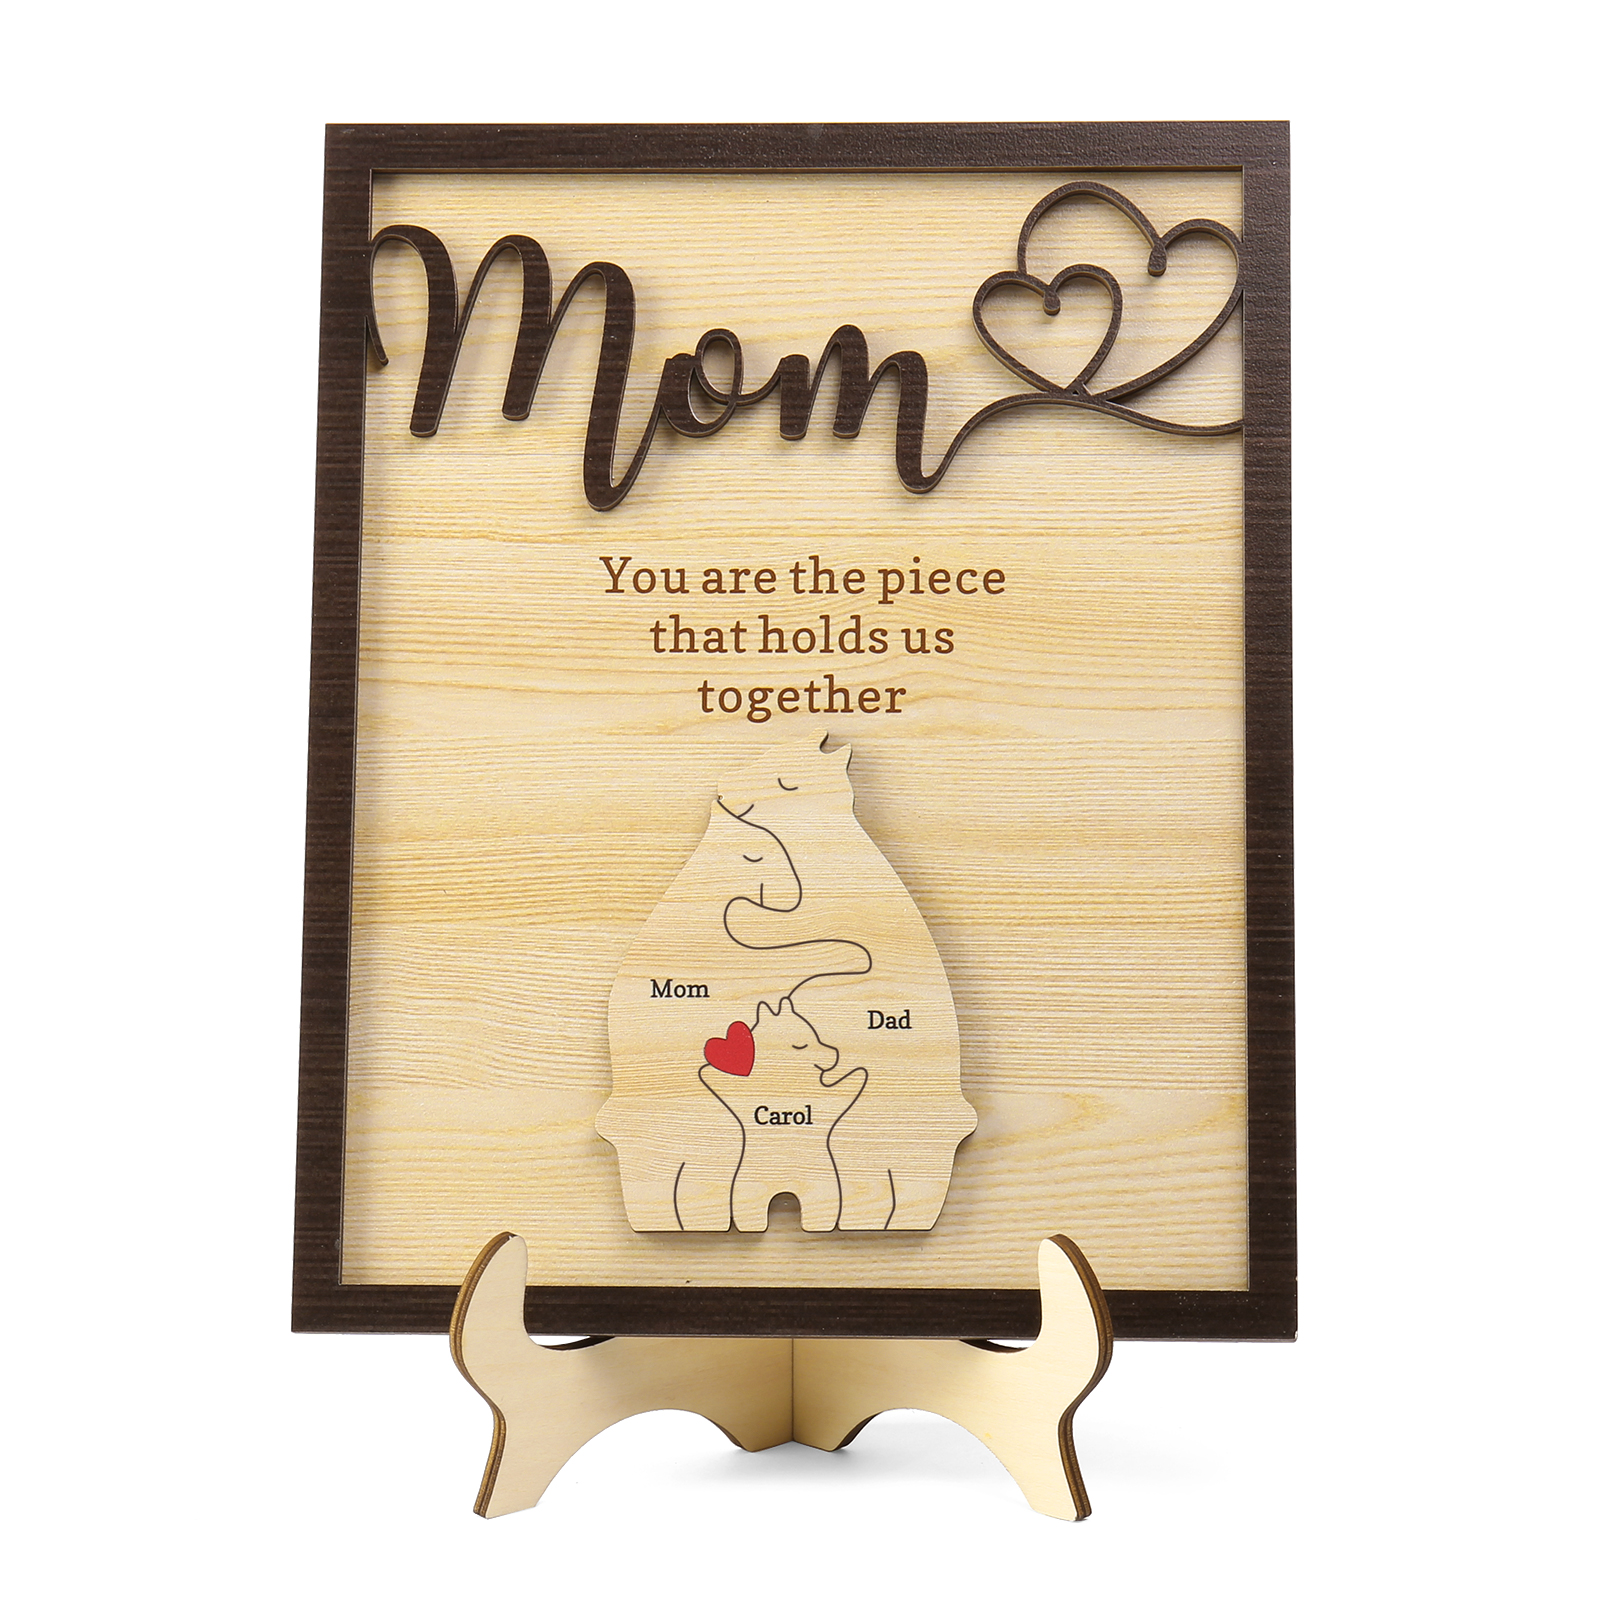 3 Names - Personalized Home Frame Wooden Ornaments Cute Bear Style Customizable 2 Text Ornaments For Mom